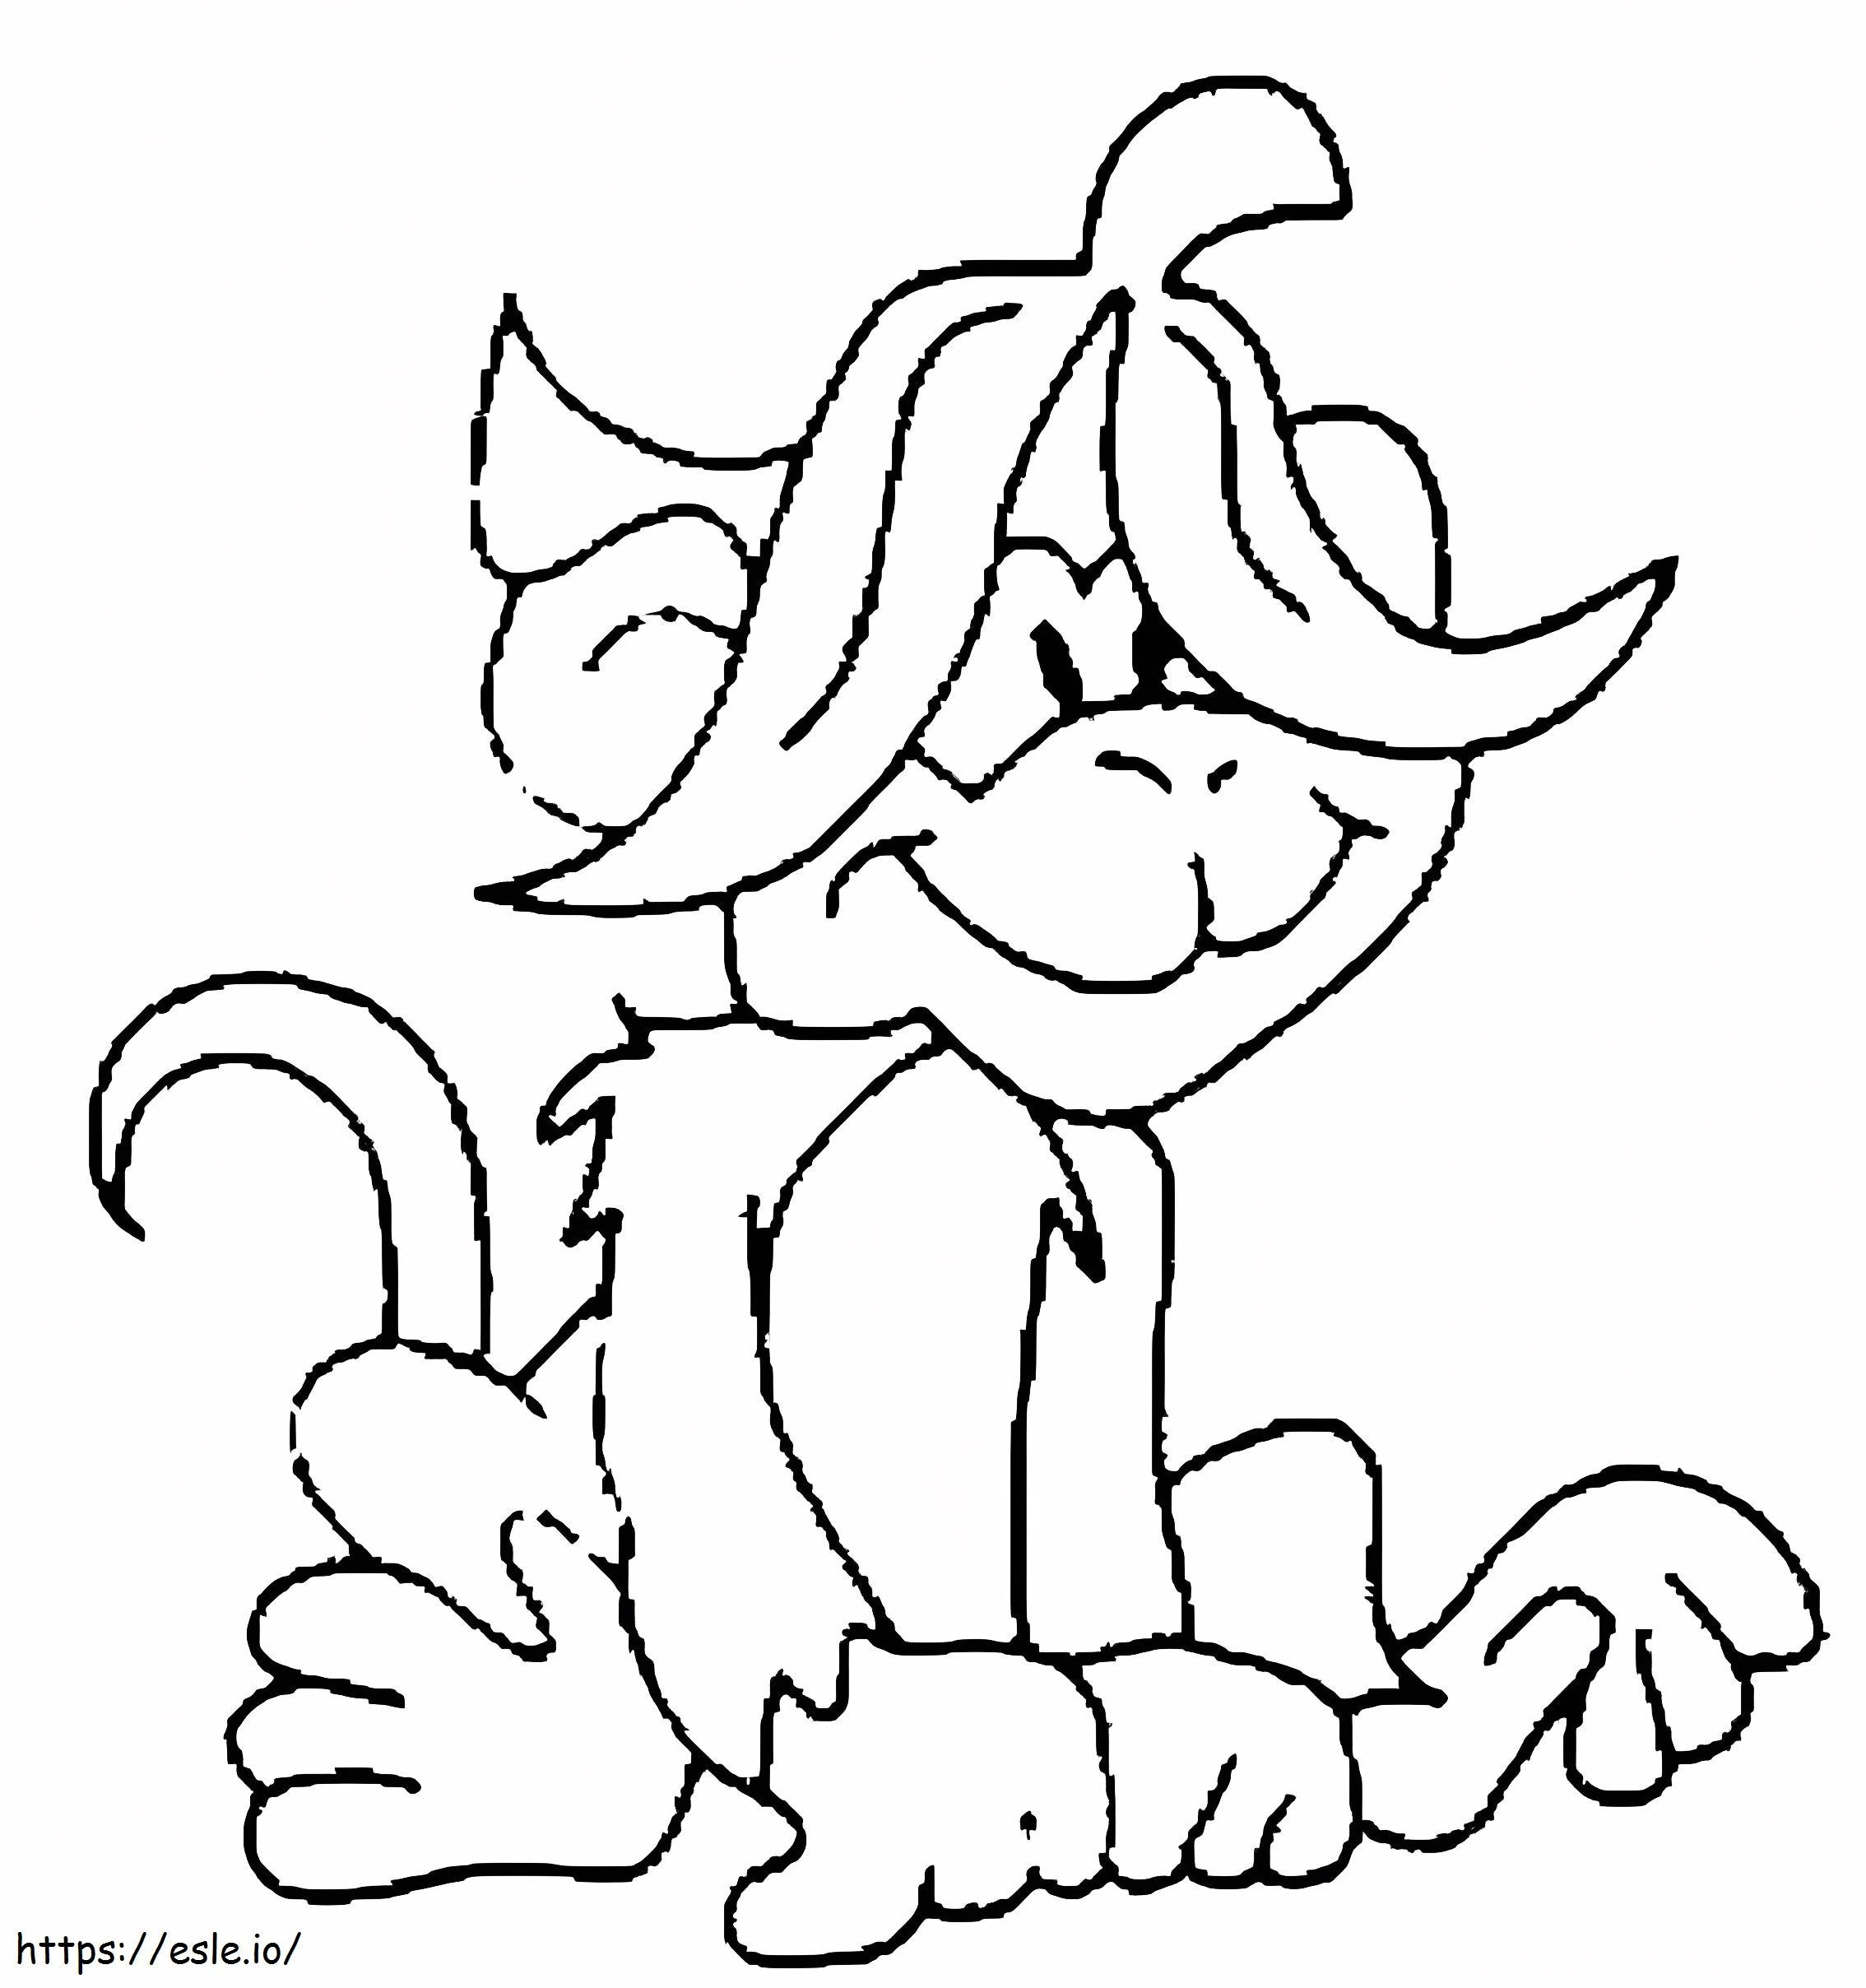 Monkey Printable coloring page